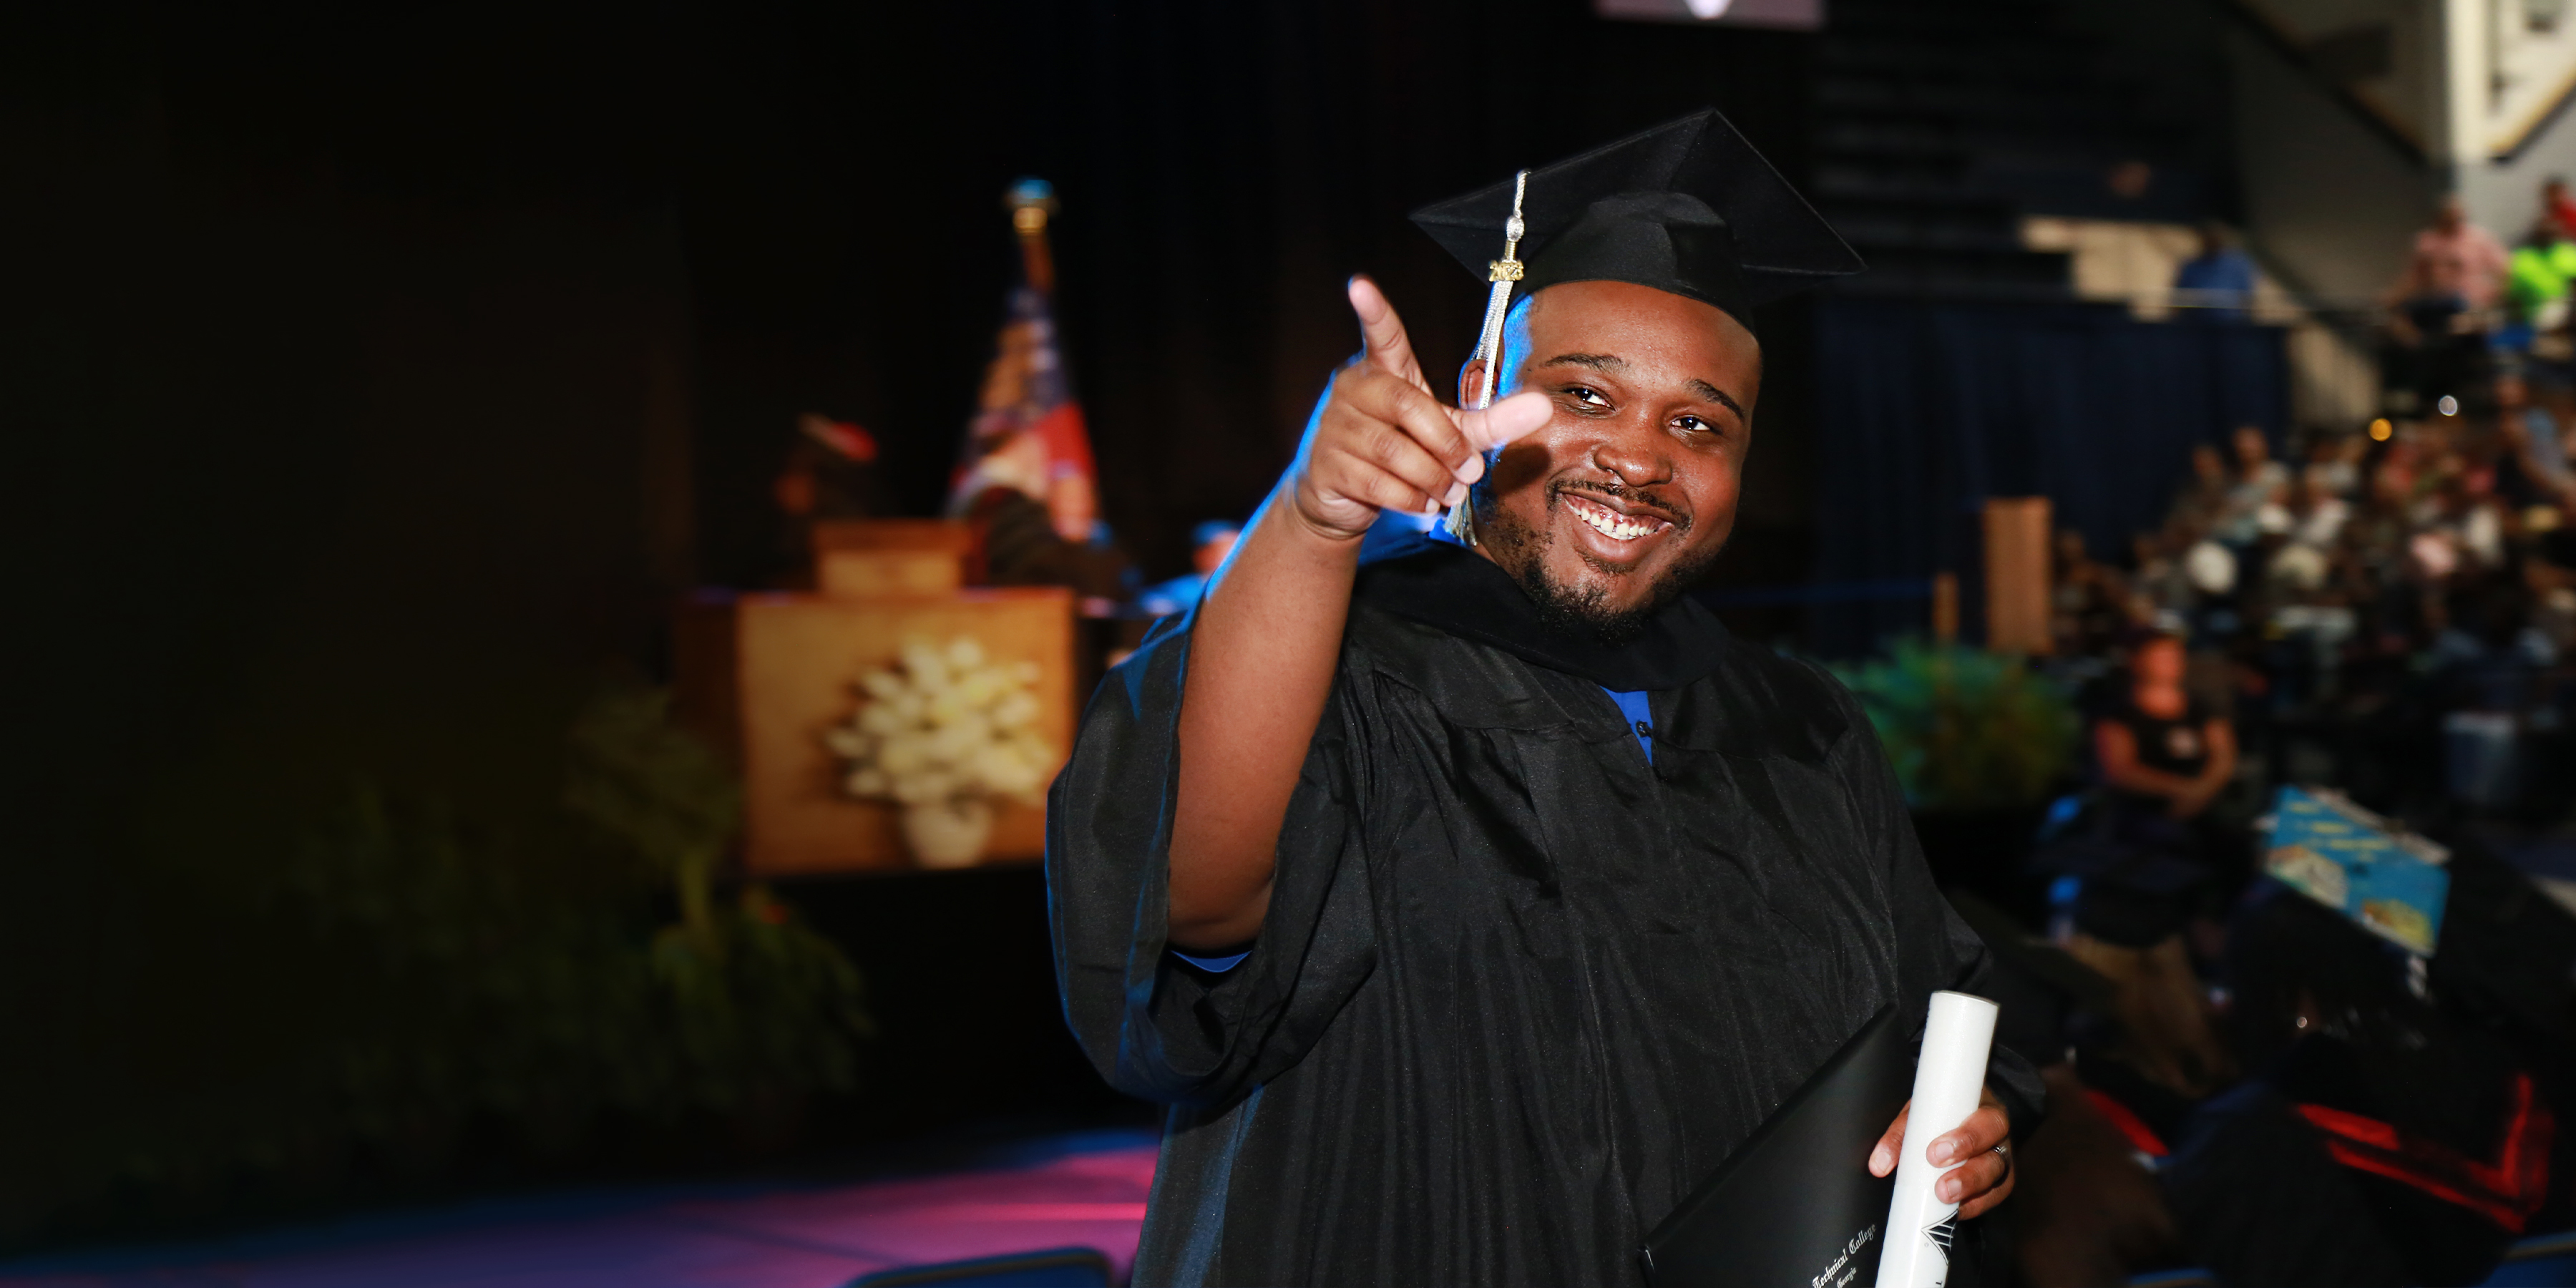 Male Graduate from Ogeechee Technical College smiling